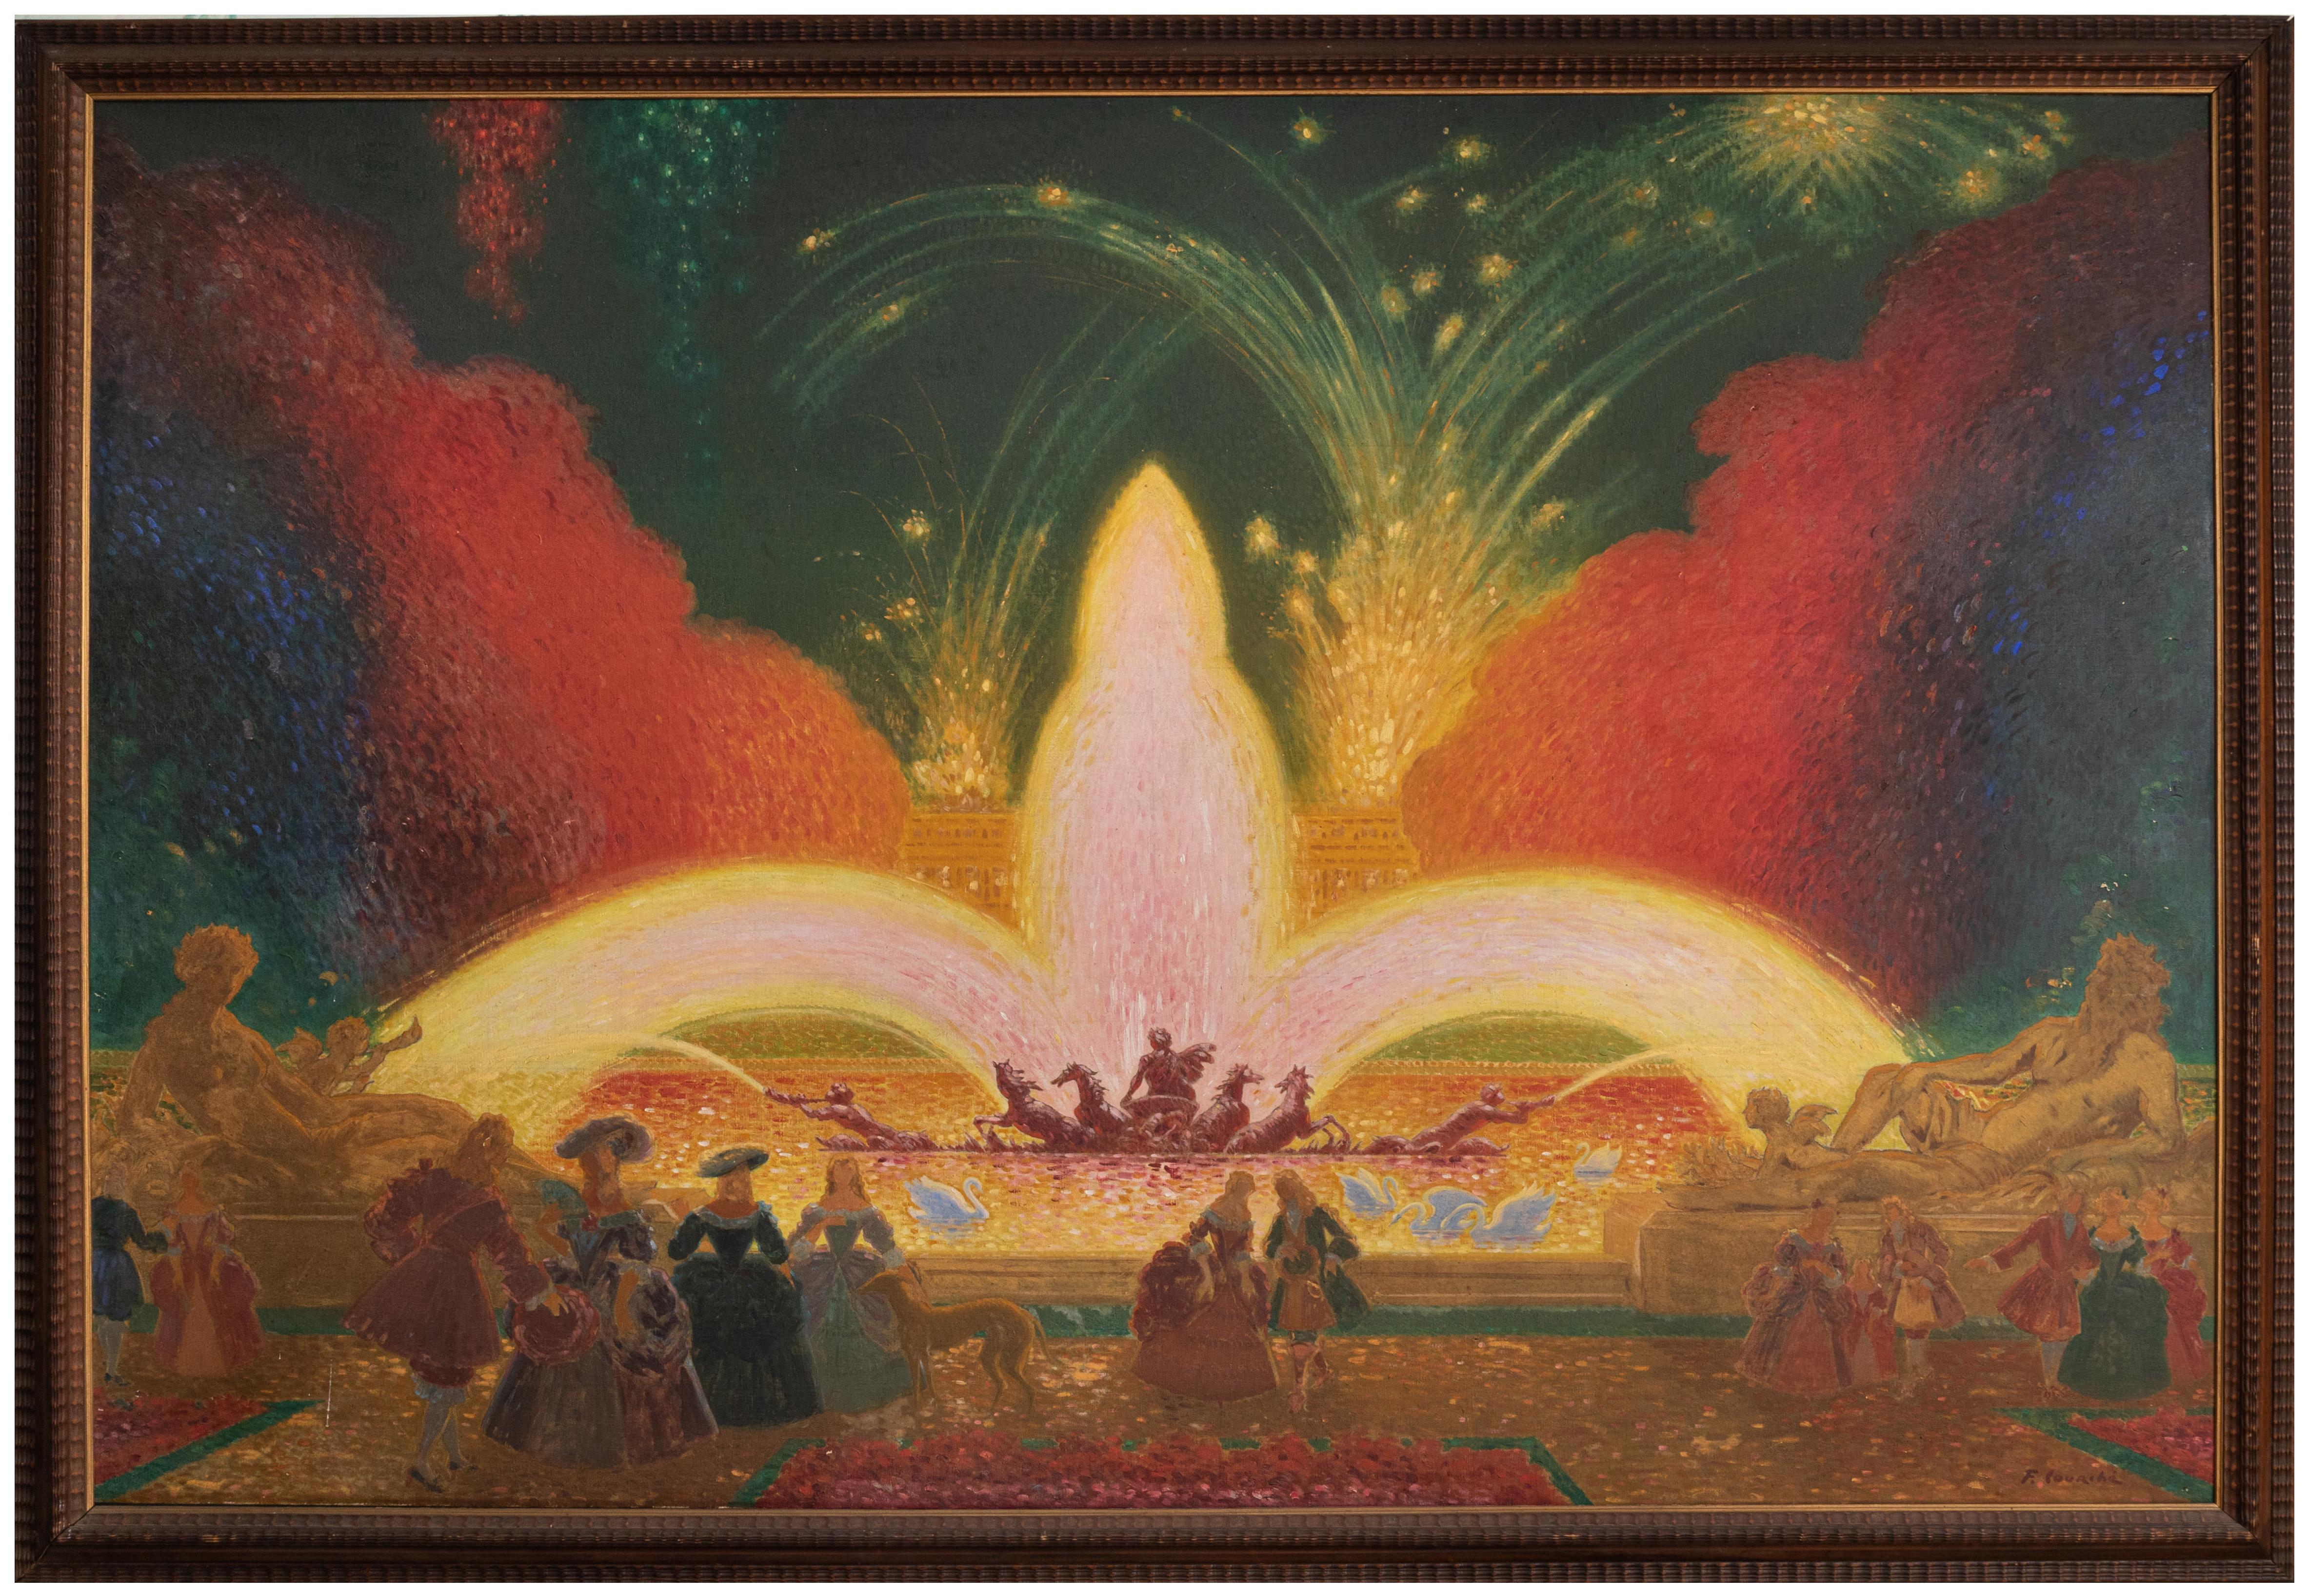 very large oil on canvas paintings by Felix Courché (1863-1944) - 160x230cm

Dated 1936 and are titled “Feux d’artifice”, representing fireworks in front of the Grandes Eaux of Versailles”.

Exhibition at the Château de Versailles - “Versailles